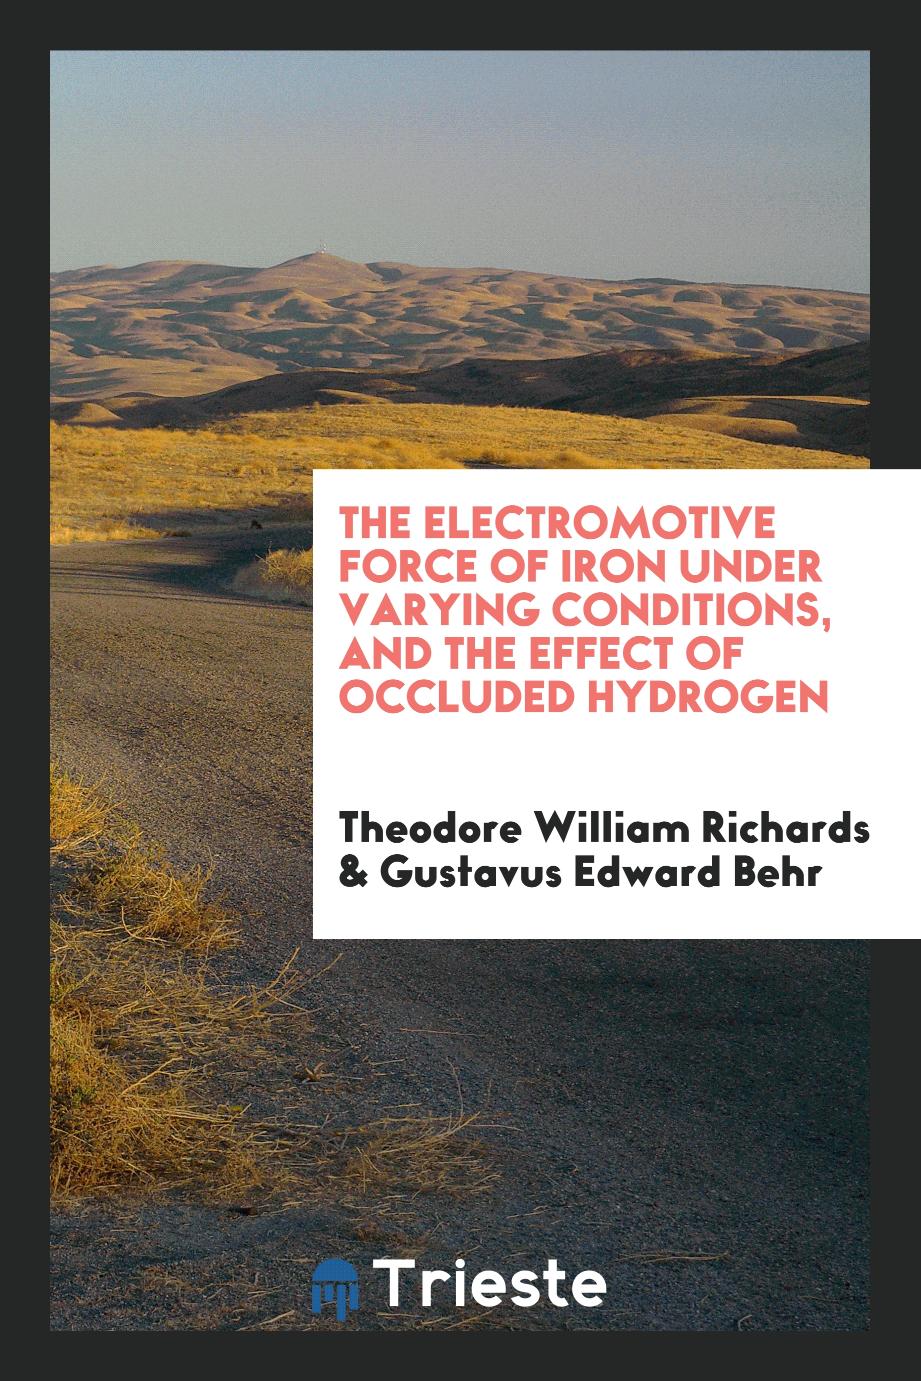 The electromotive force of iron under varying conditions, and the effect of occluded hydrogen